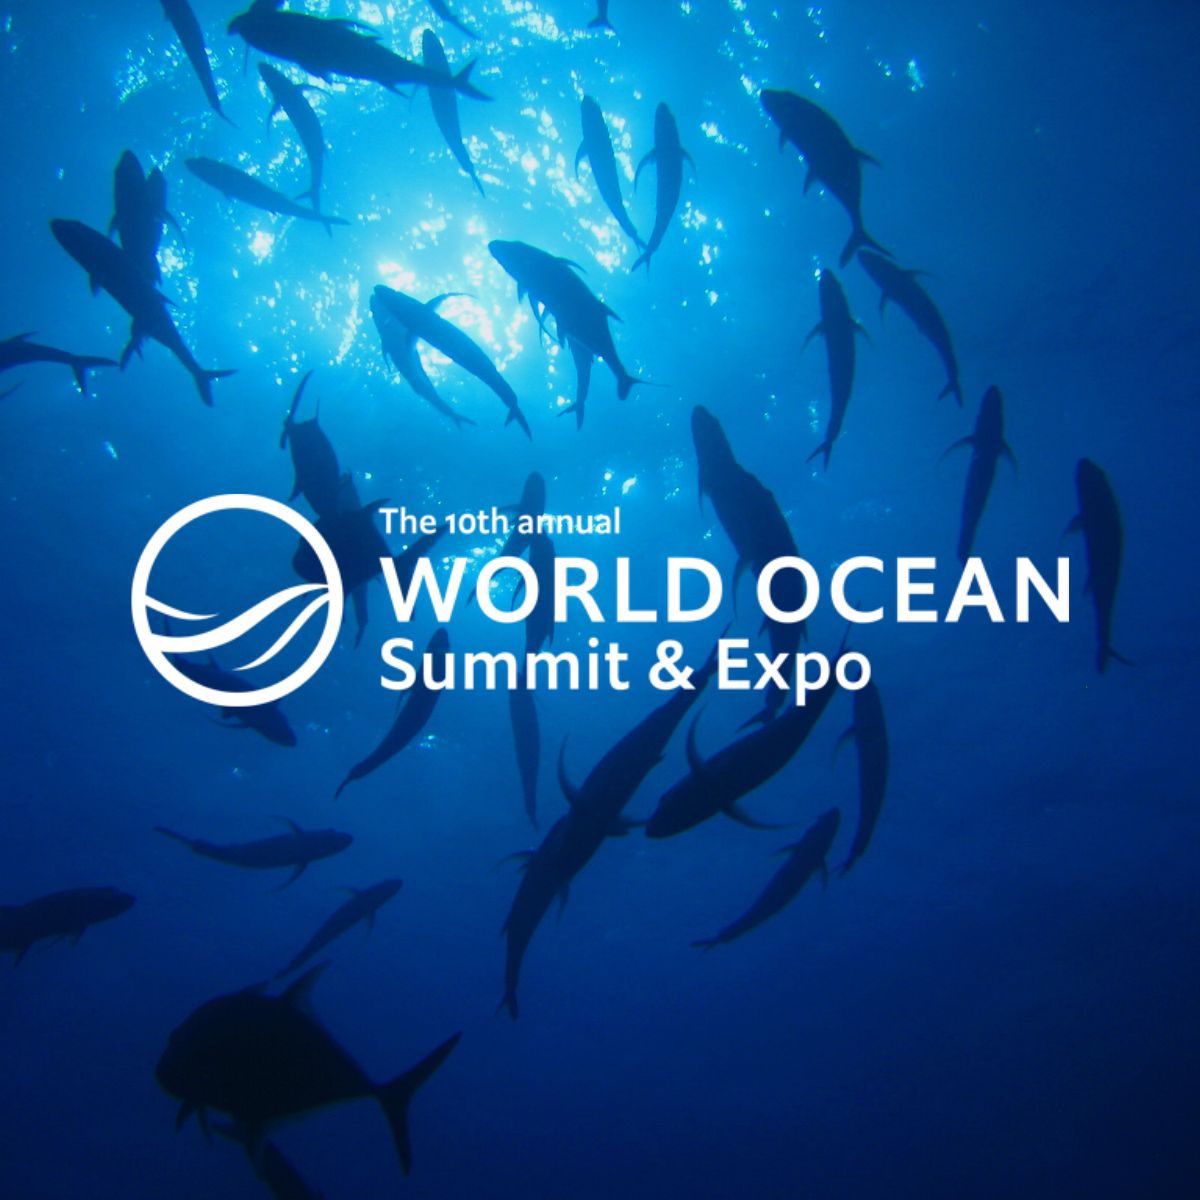 🗓️ In just one week we will be attending the World #OceanSummit & Expo in #Lisbon, #Portugal to discuss #bluefinance and how to build the traceability mechanisms we need to protect our #oceans.

👋 Are you going? Let us know in the comments and let's catch up in person!